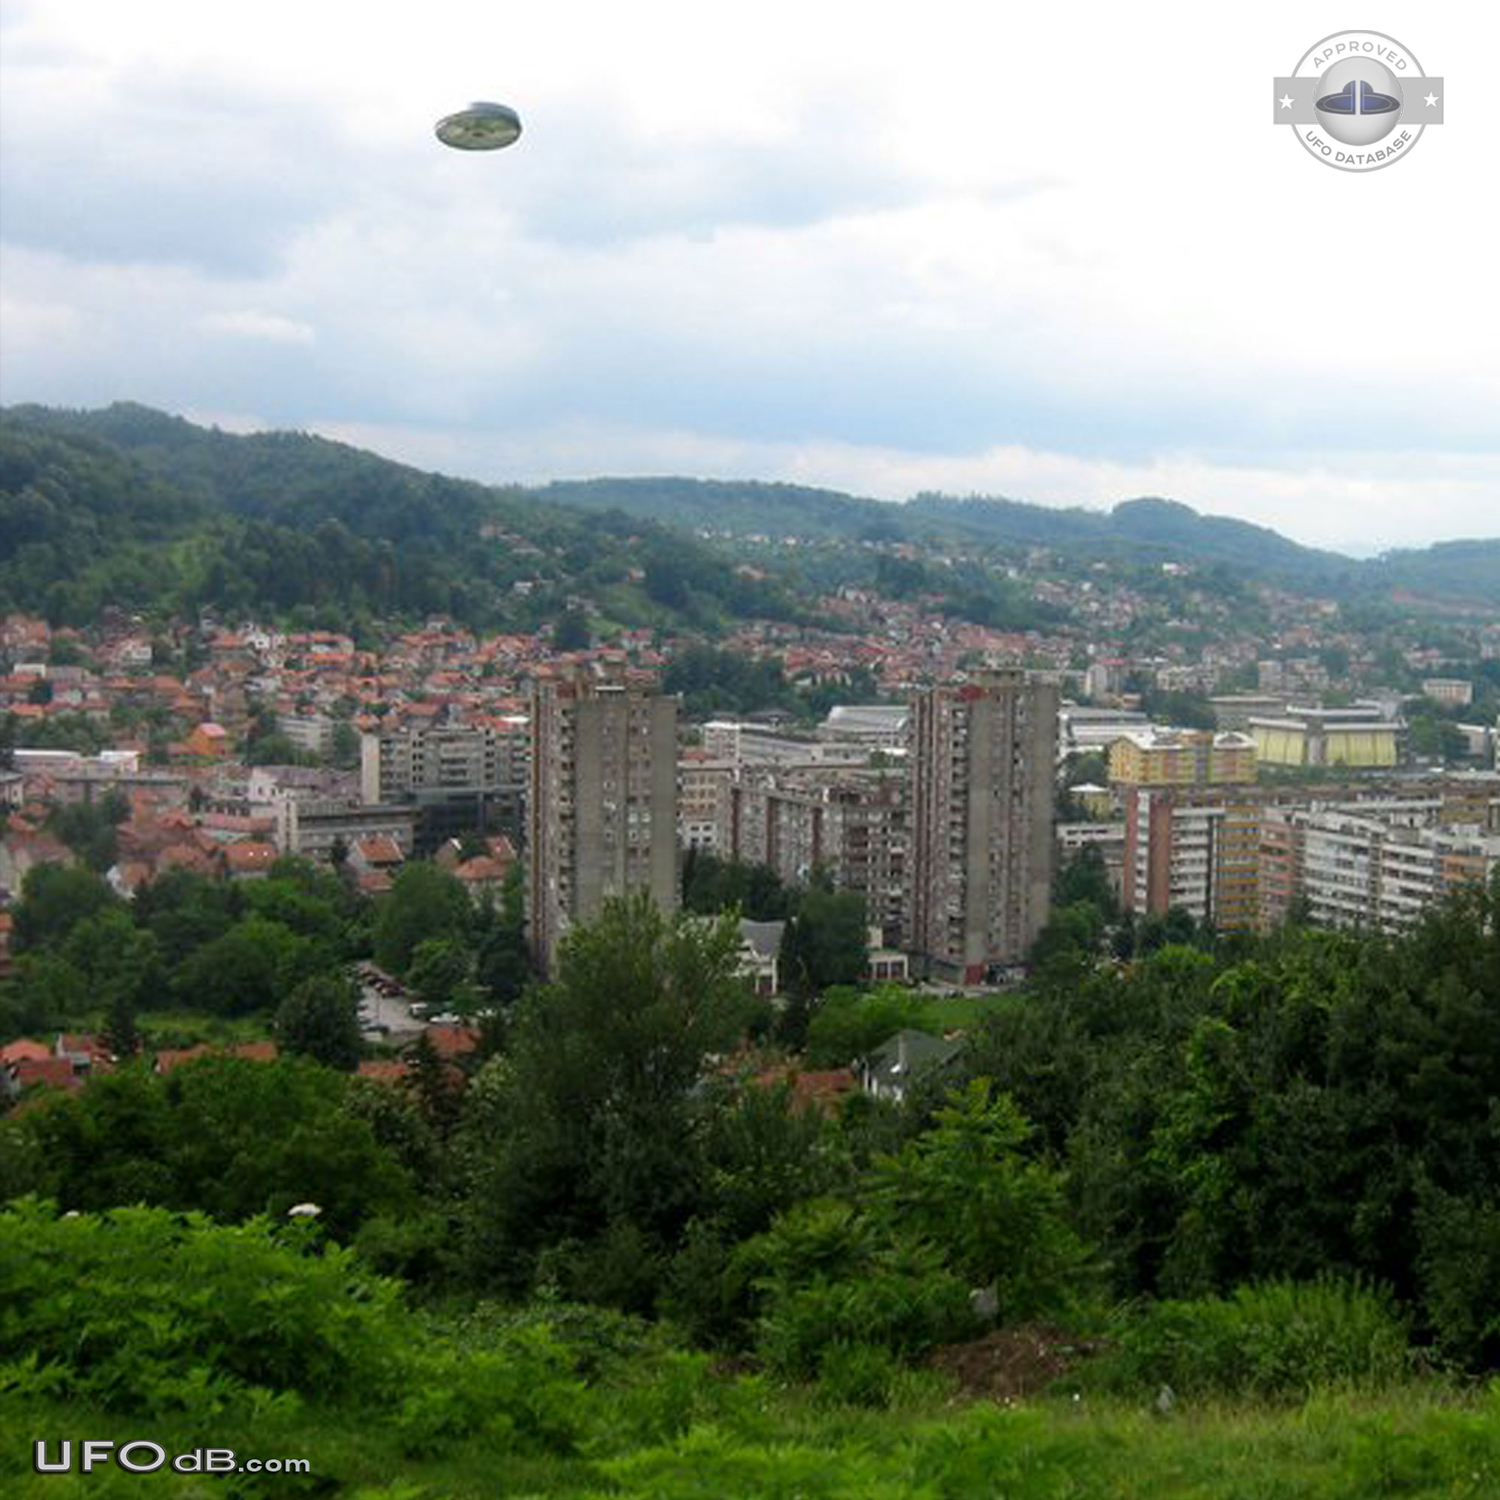 Cylinder UFO appear with a Flash but caught on picture - Tuzla Bosnia UFO Picture #532-1